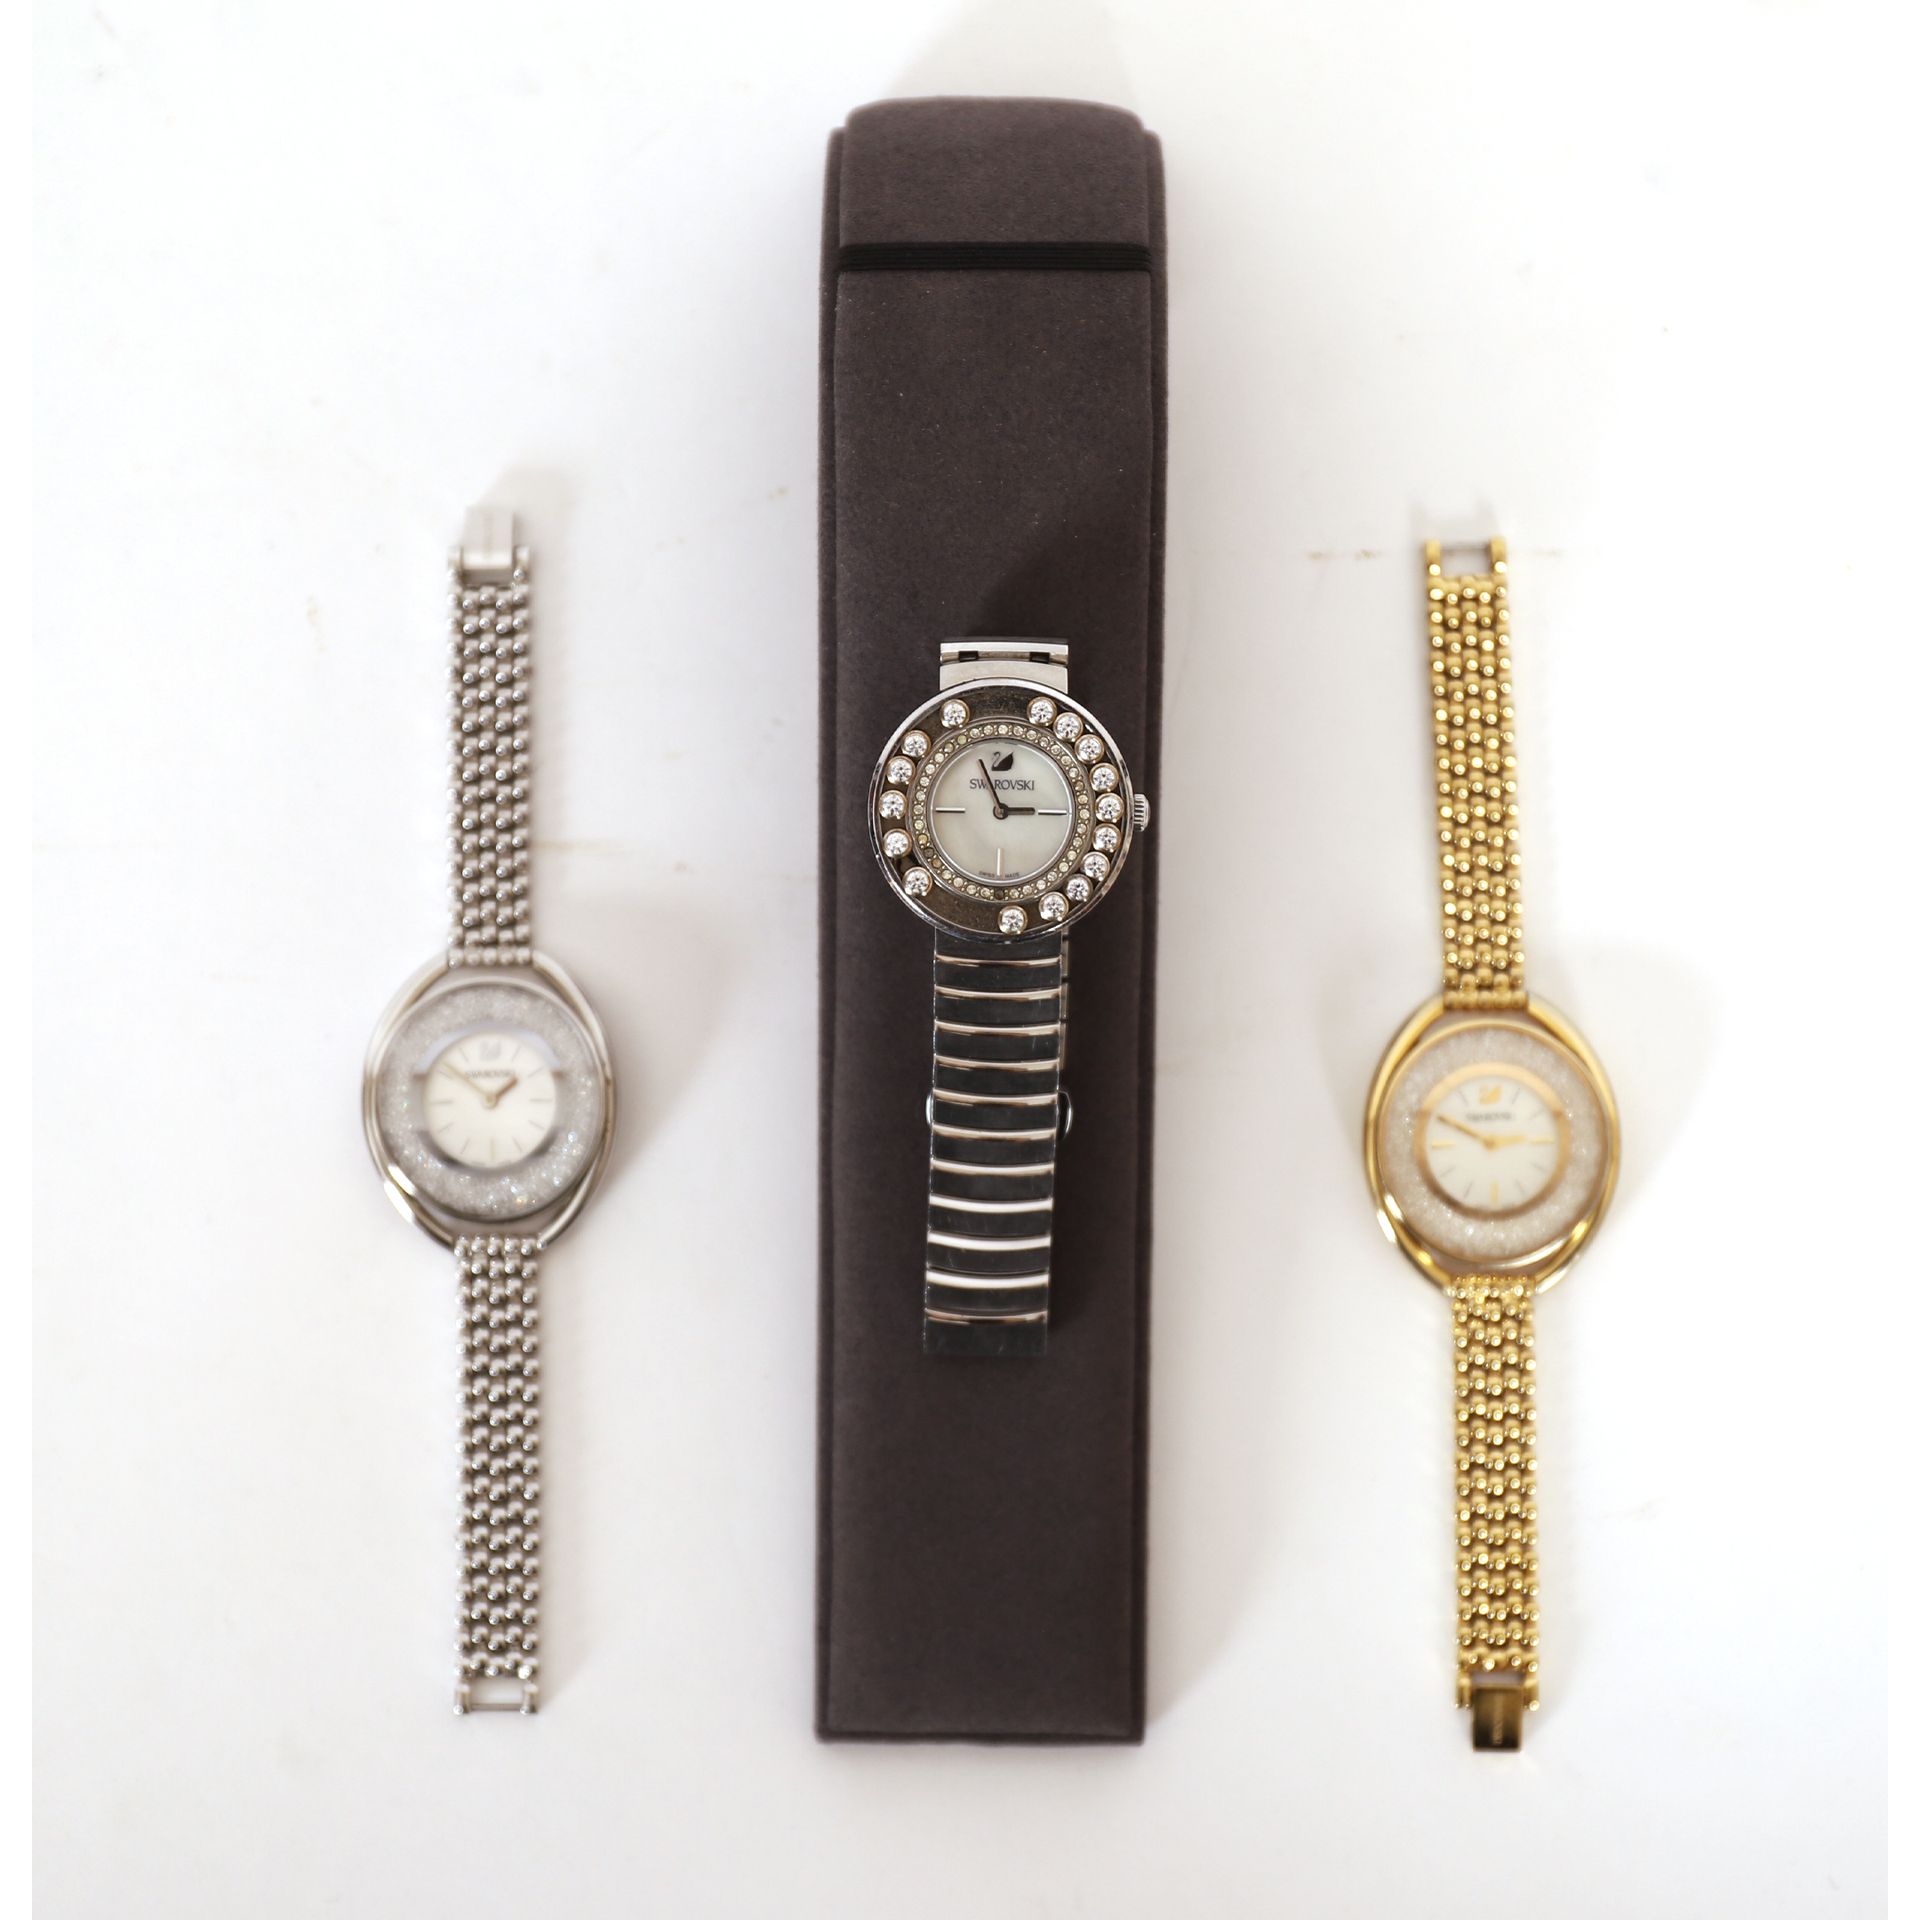 Null SET OF 3 SWAROVSKI LADIES WATCHES

Silver and gold plated metal

Worn